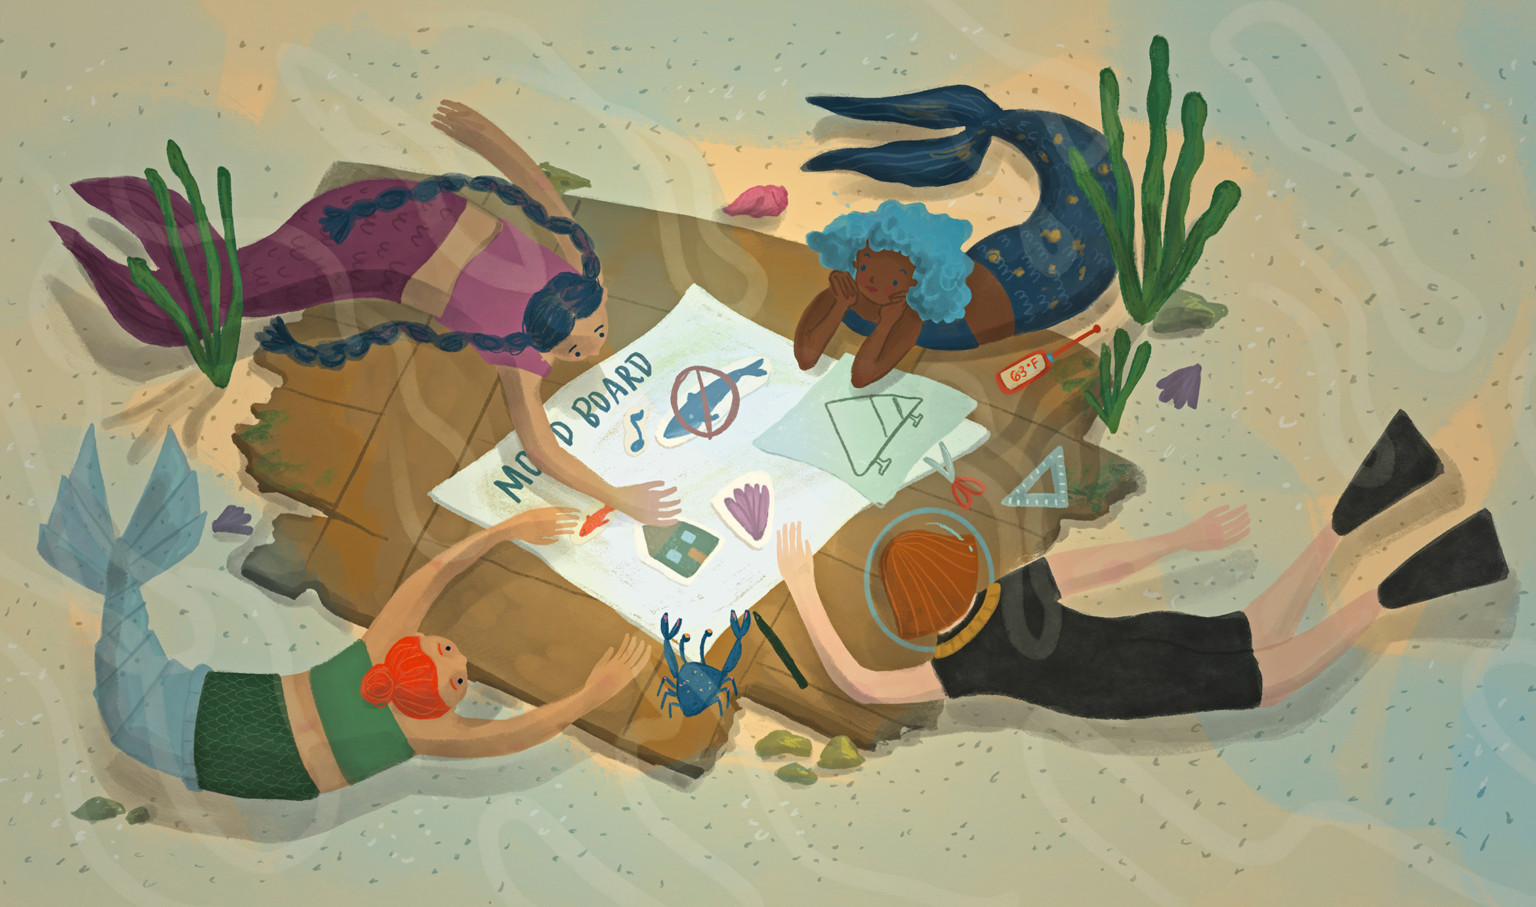 illustration by Mika Rane showing mermaids and a scuba diver collaborating around a vision board to develop design plans